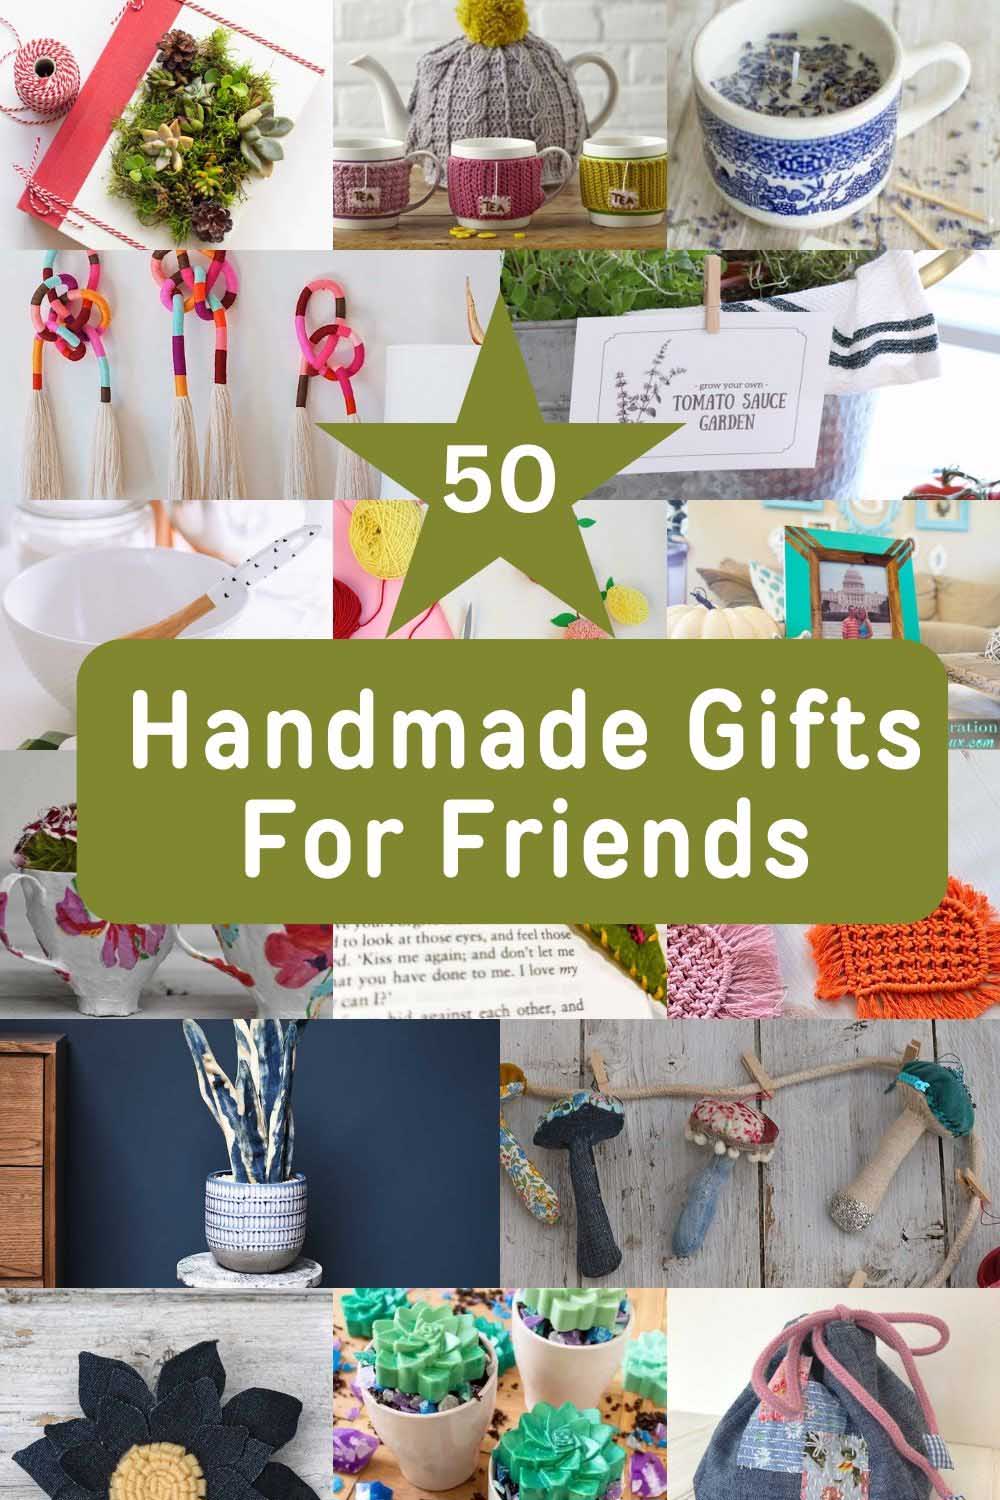 8 Wedding Gifts For Your Best Friend | Style Hub-cokhiquangminh.vn